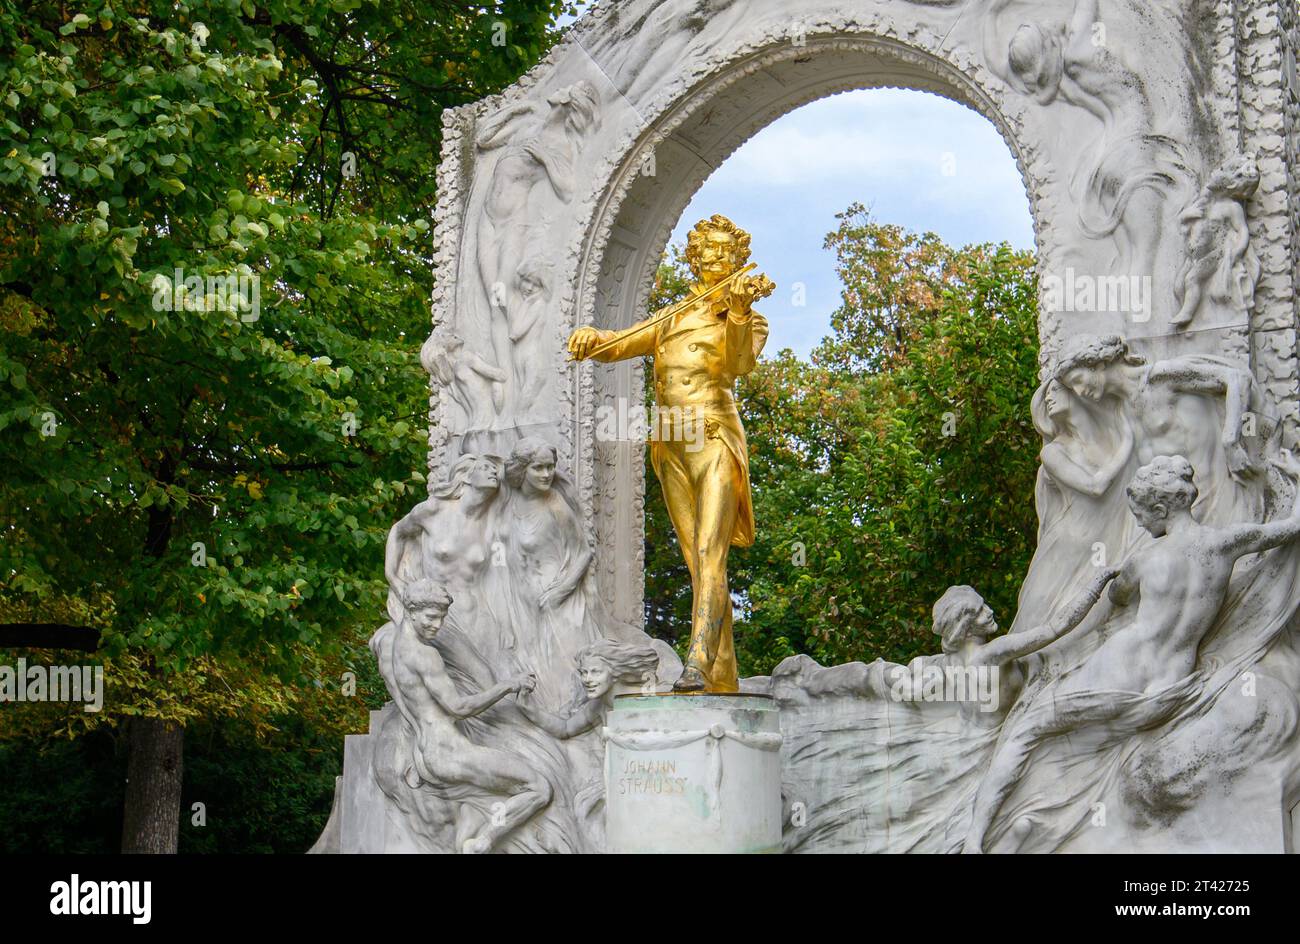 Vienna, Austria. Monument of Johann Strauss. Famous golden statue of great Austrian composer, playing violin in the Stadtpark (city park) Stock Photo